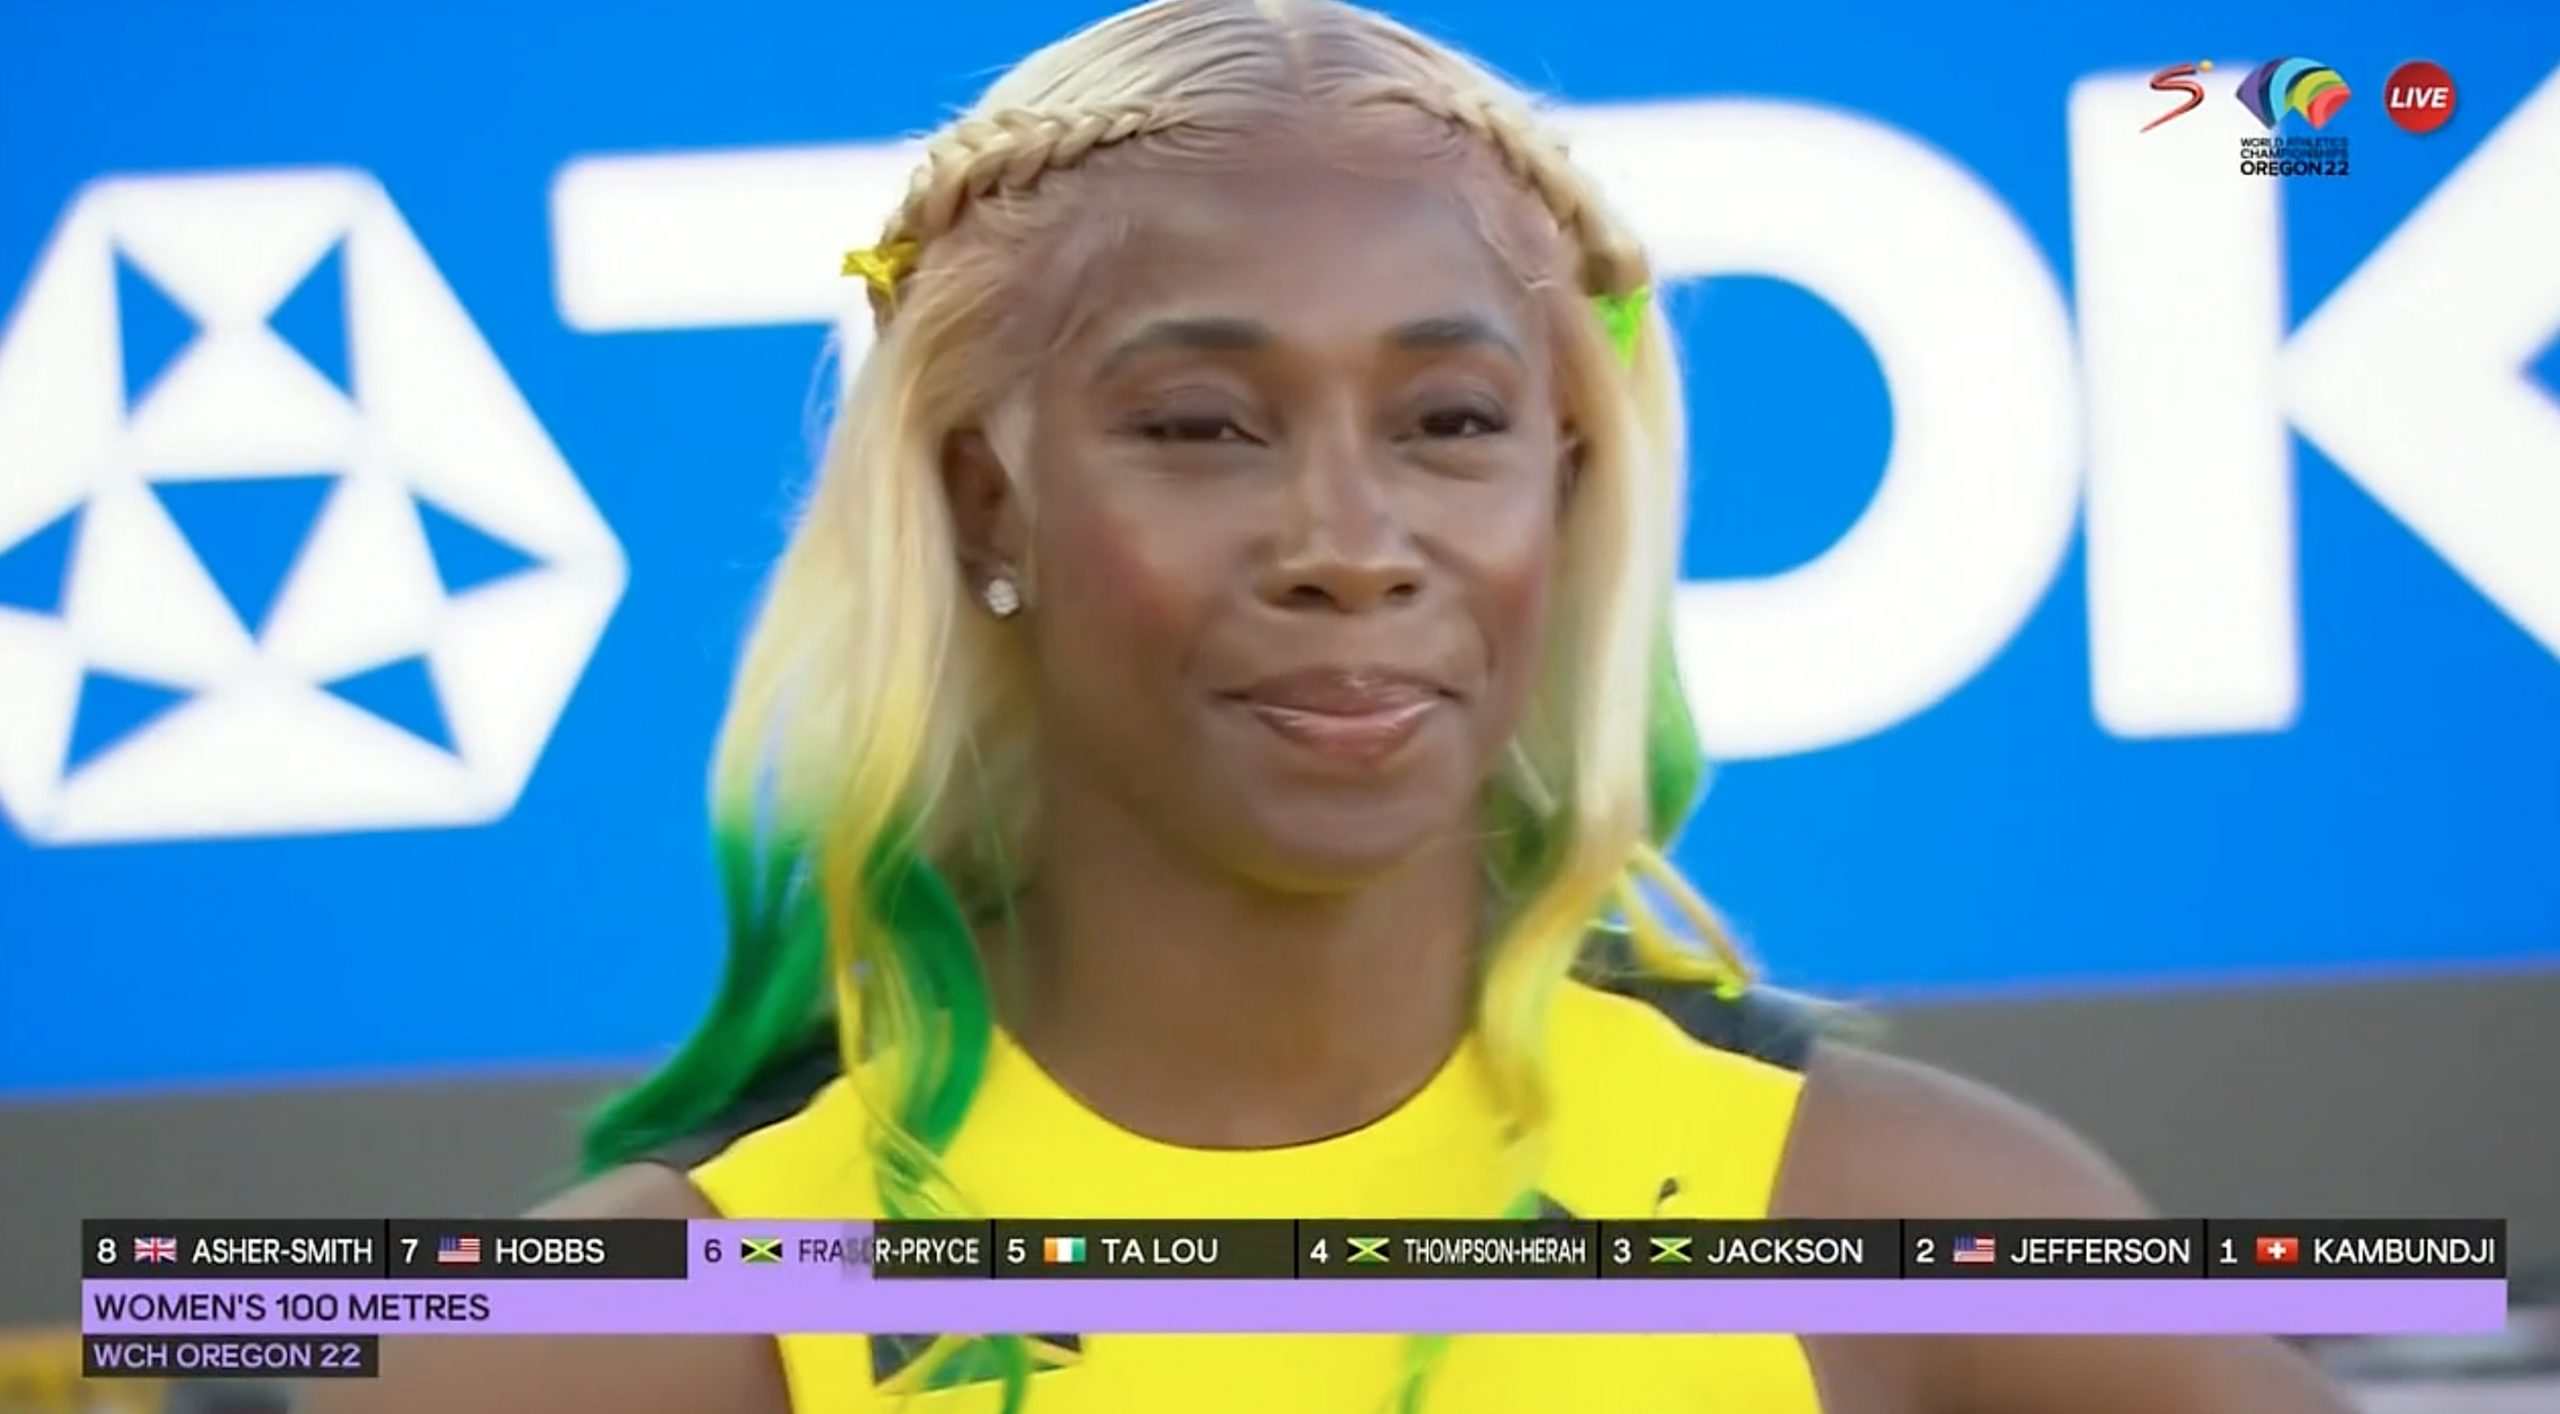 Fraser-Pryce Wins Gold, Jackson Silver And Thompson-Hera Bronze In Women’s 100m World Championships Final – Watch Race – YARDHYPE